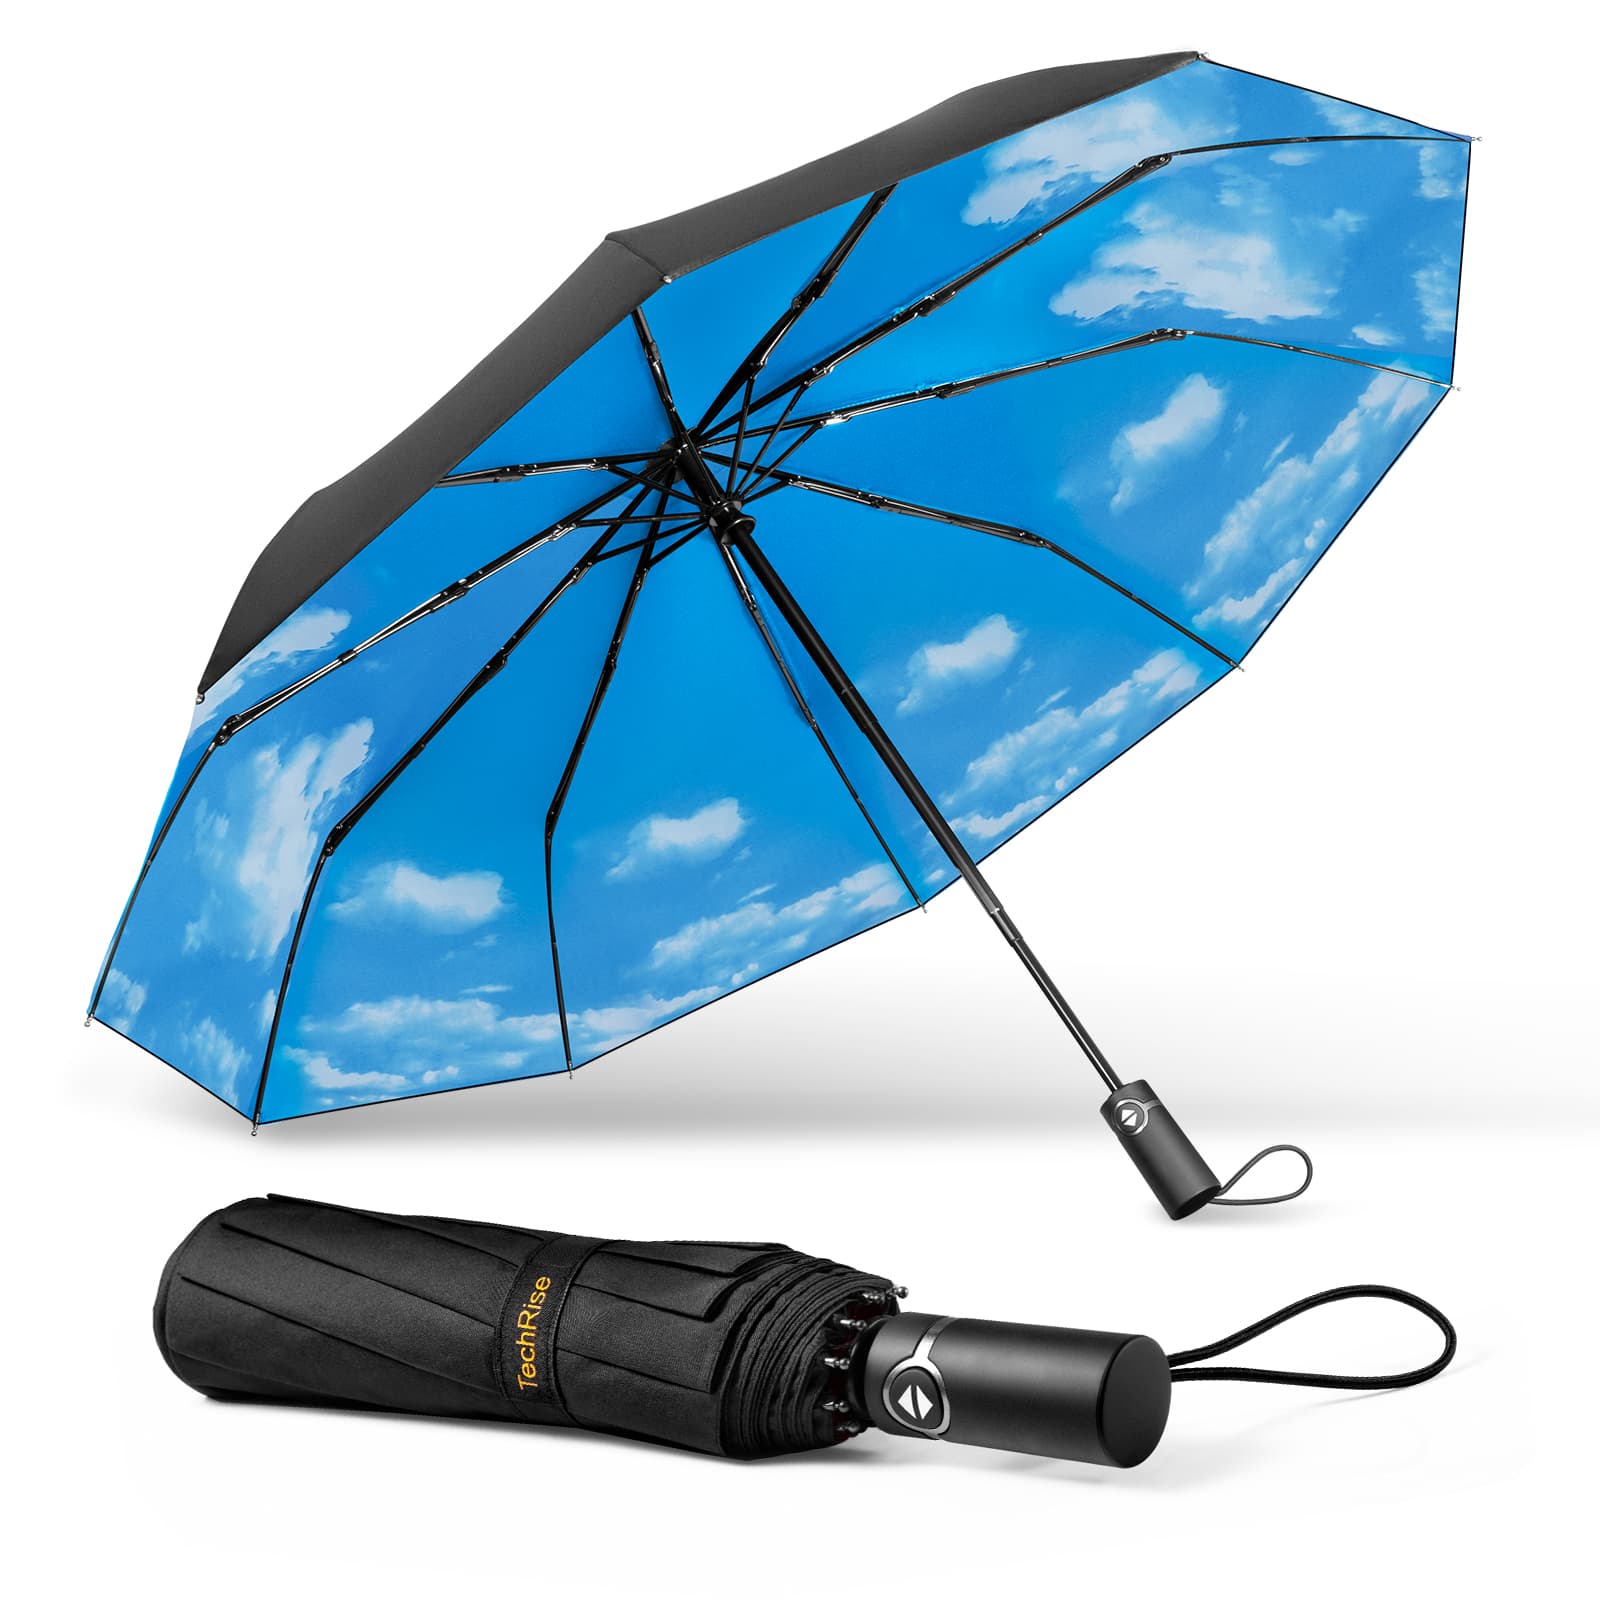 TechRise Windproof Automatic Umbrella with 10 Ribs